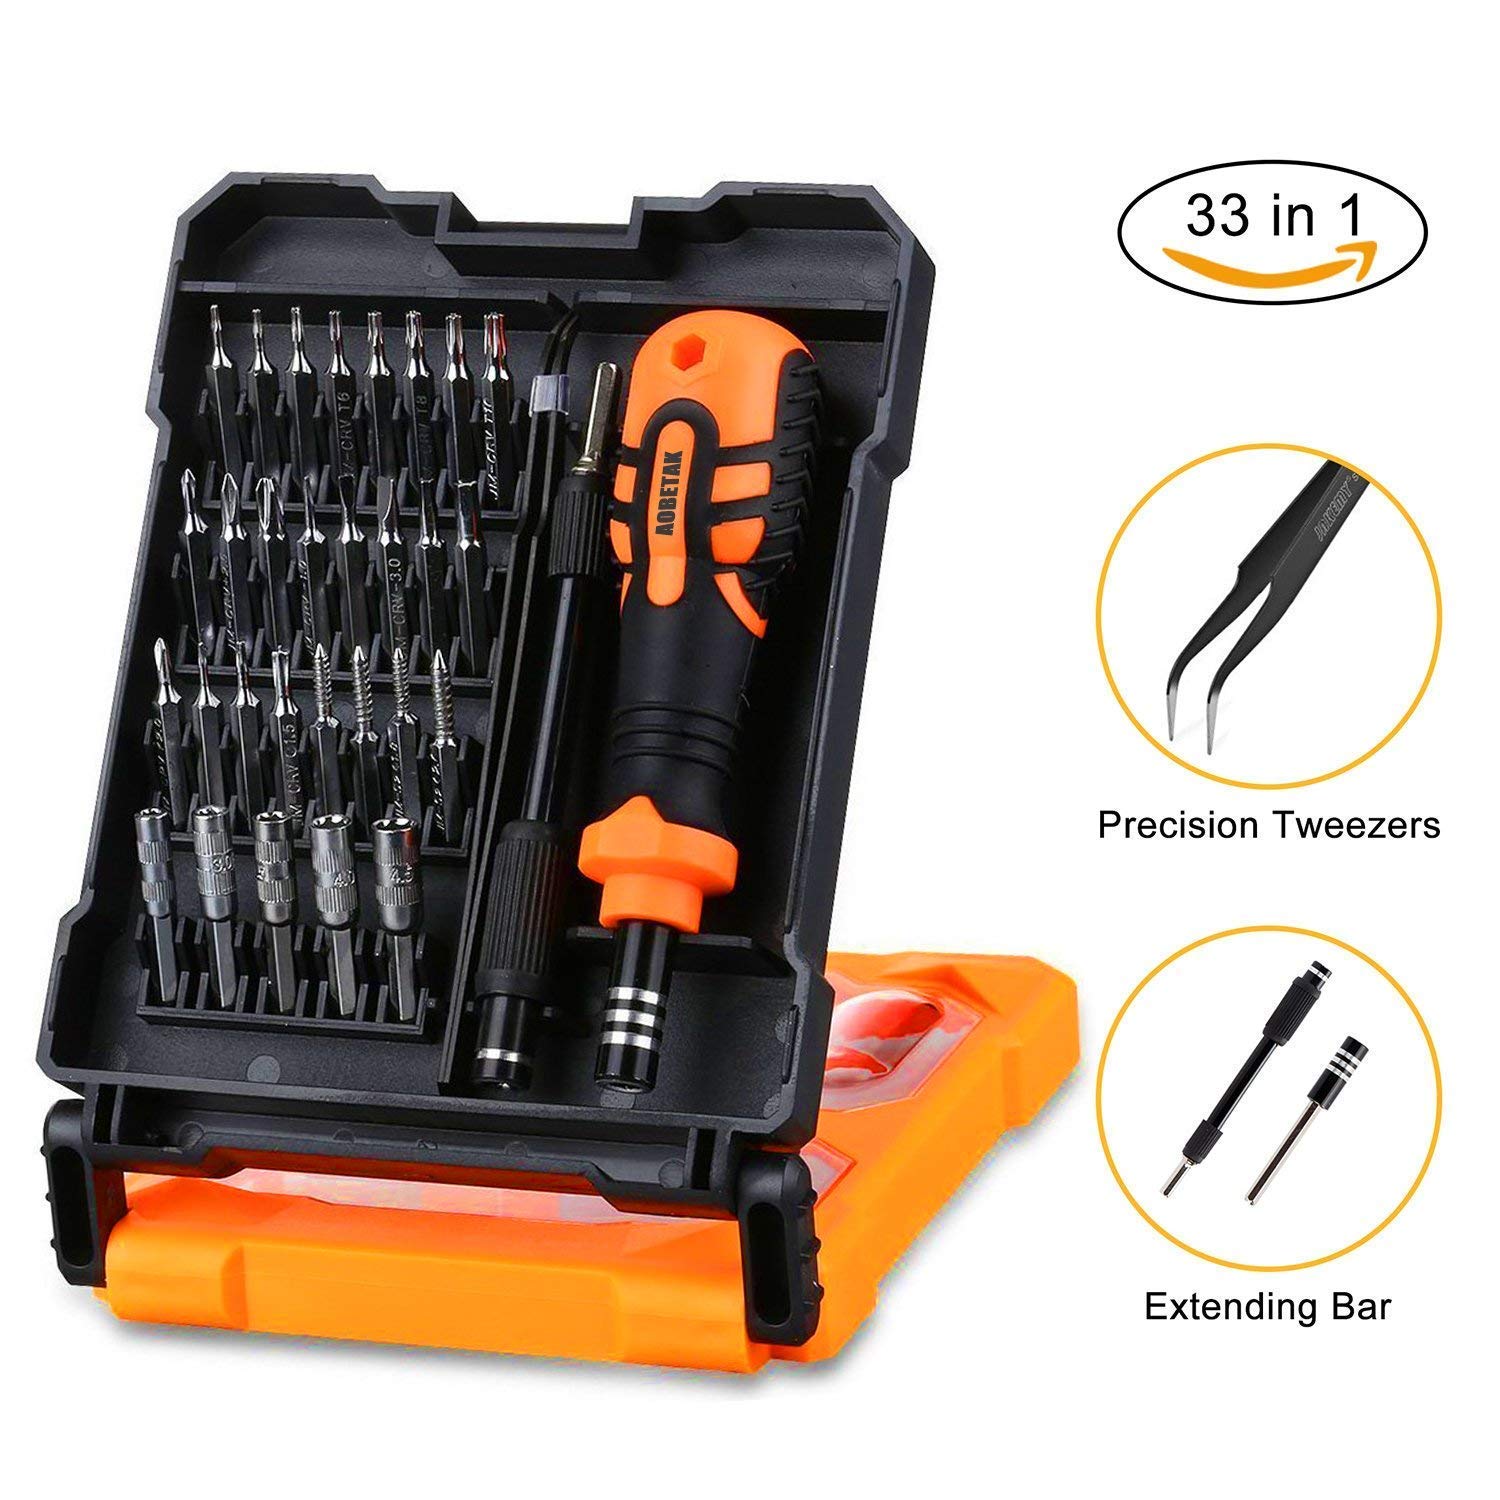 Precision Screwdriver Set, AOBETAK 33 in 1 Magnetic Repair Tool Kit Include Ratchet/Hex/Star Torx/Pentalobe/Nut Drivers Sets with Portable Case for PC Mac iPhone Watch Glasses and Other Electronics